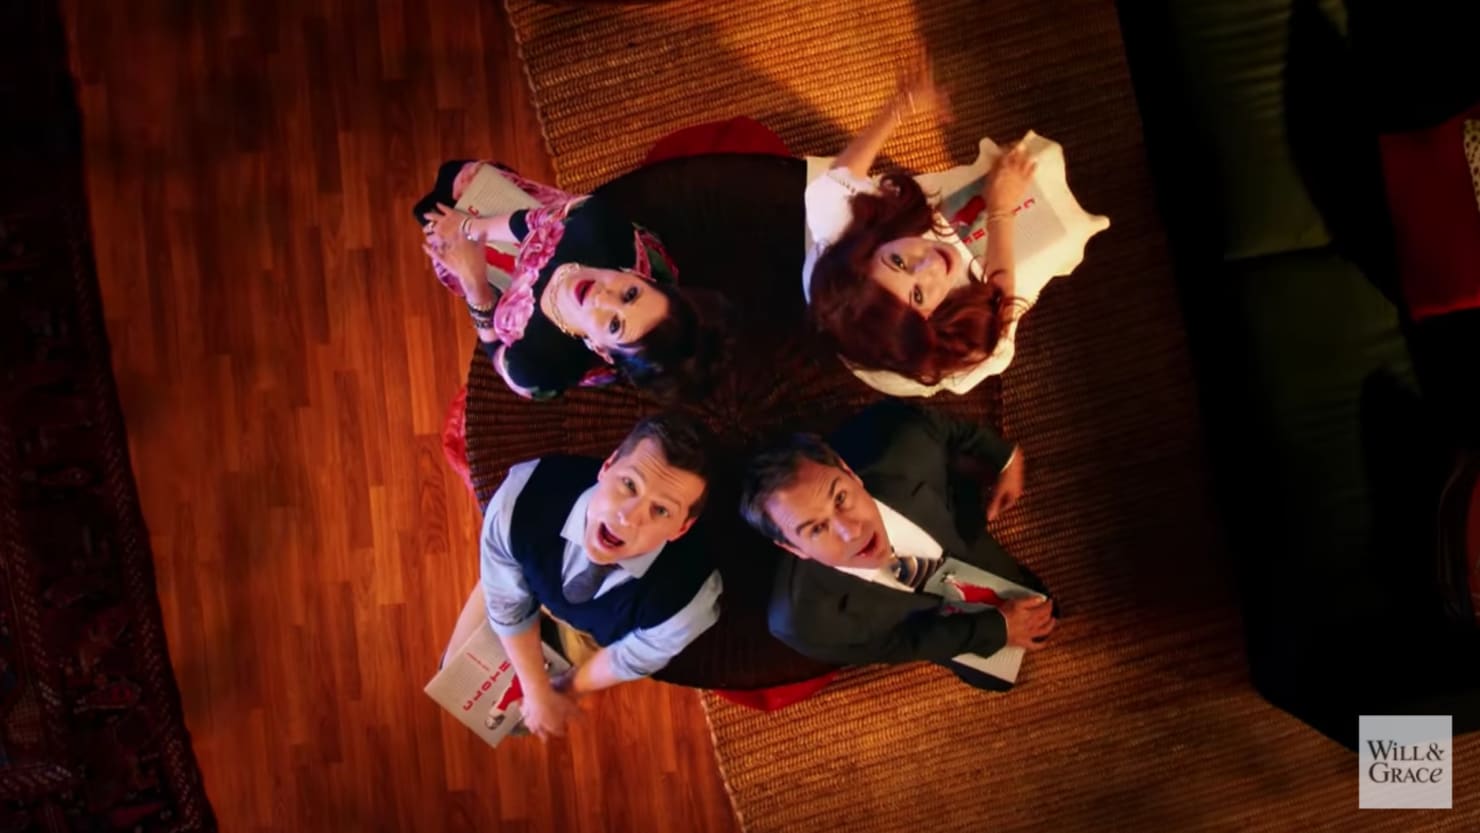 Watch: ‘Will and Grace’ Reboot Gets Musical Debut1480 x 833